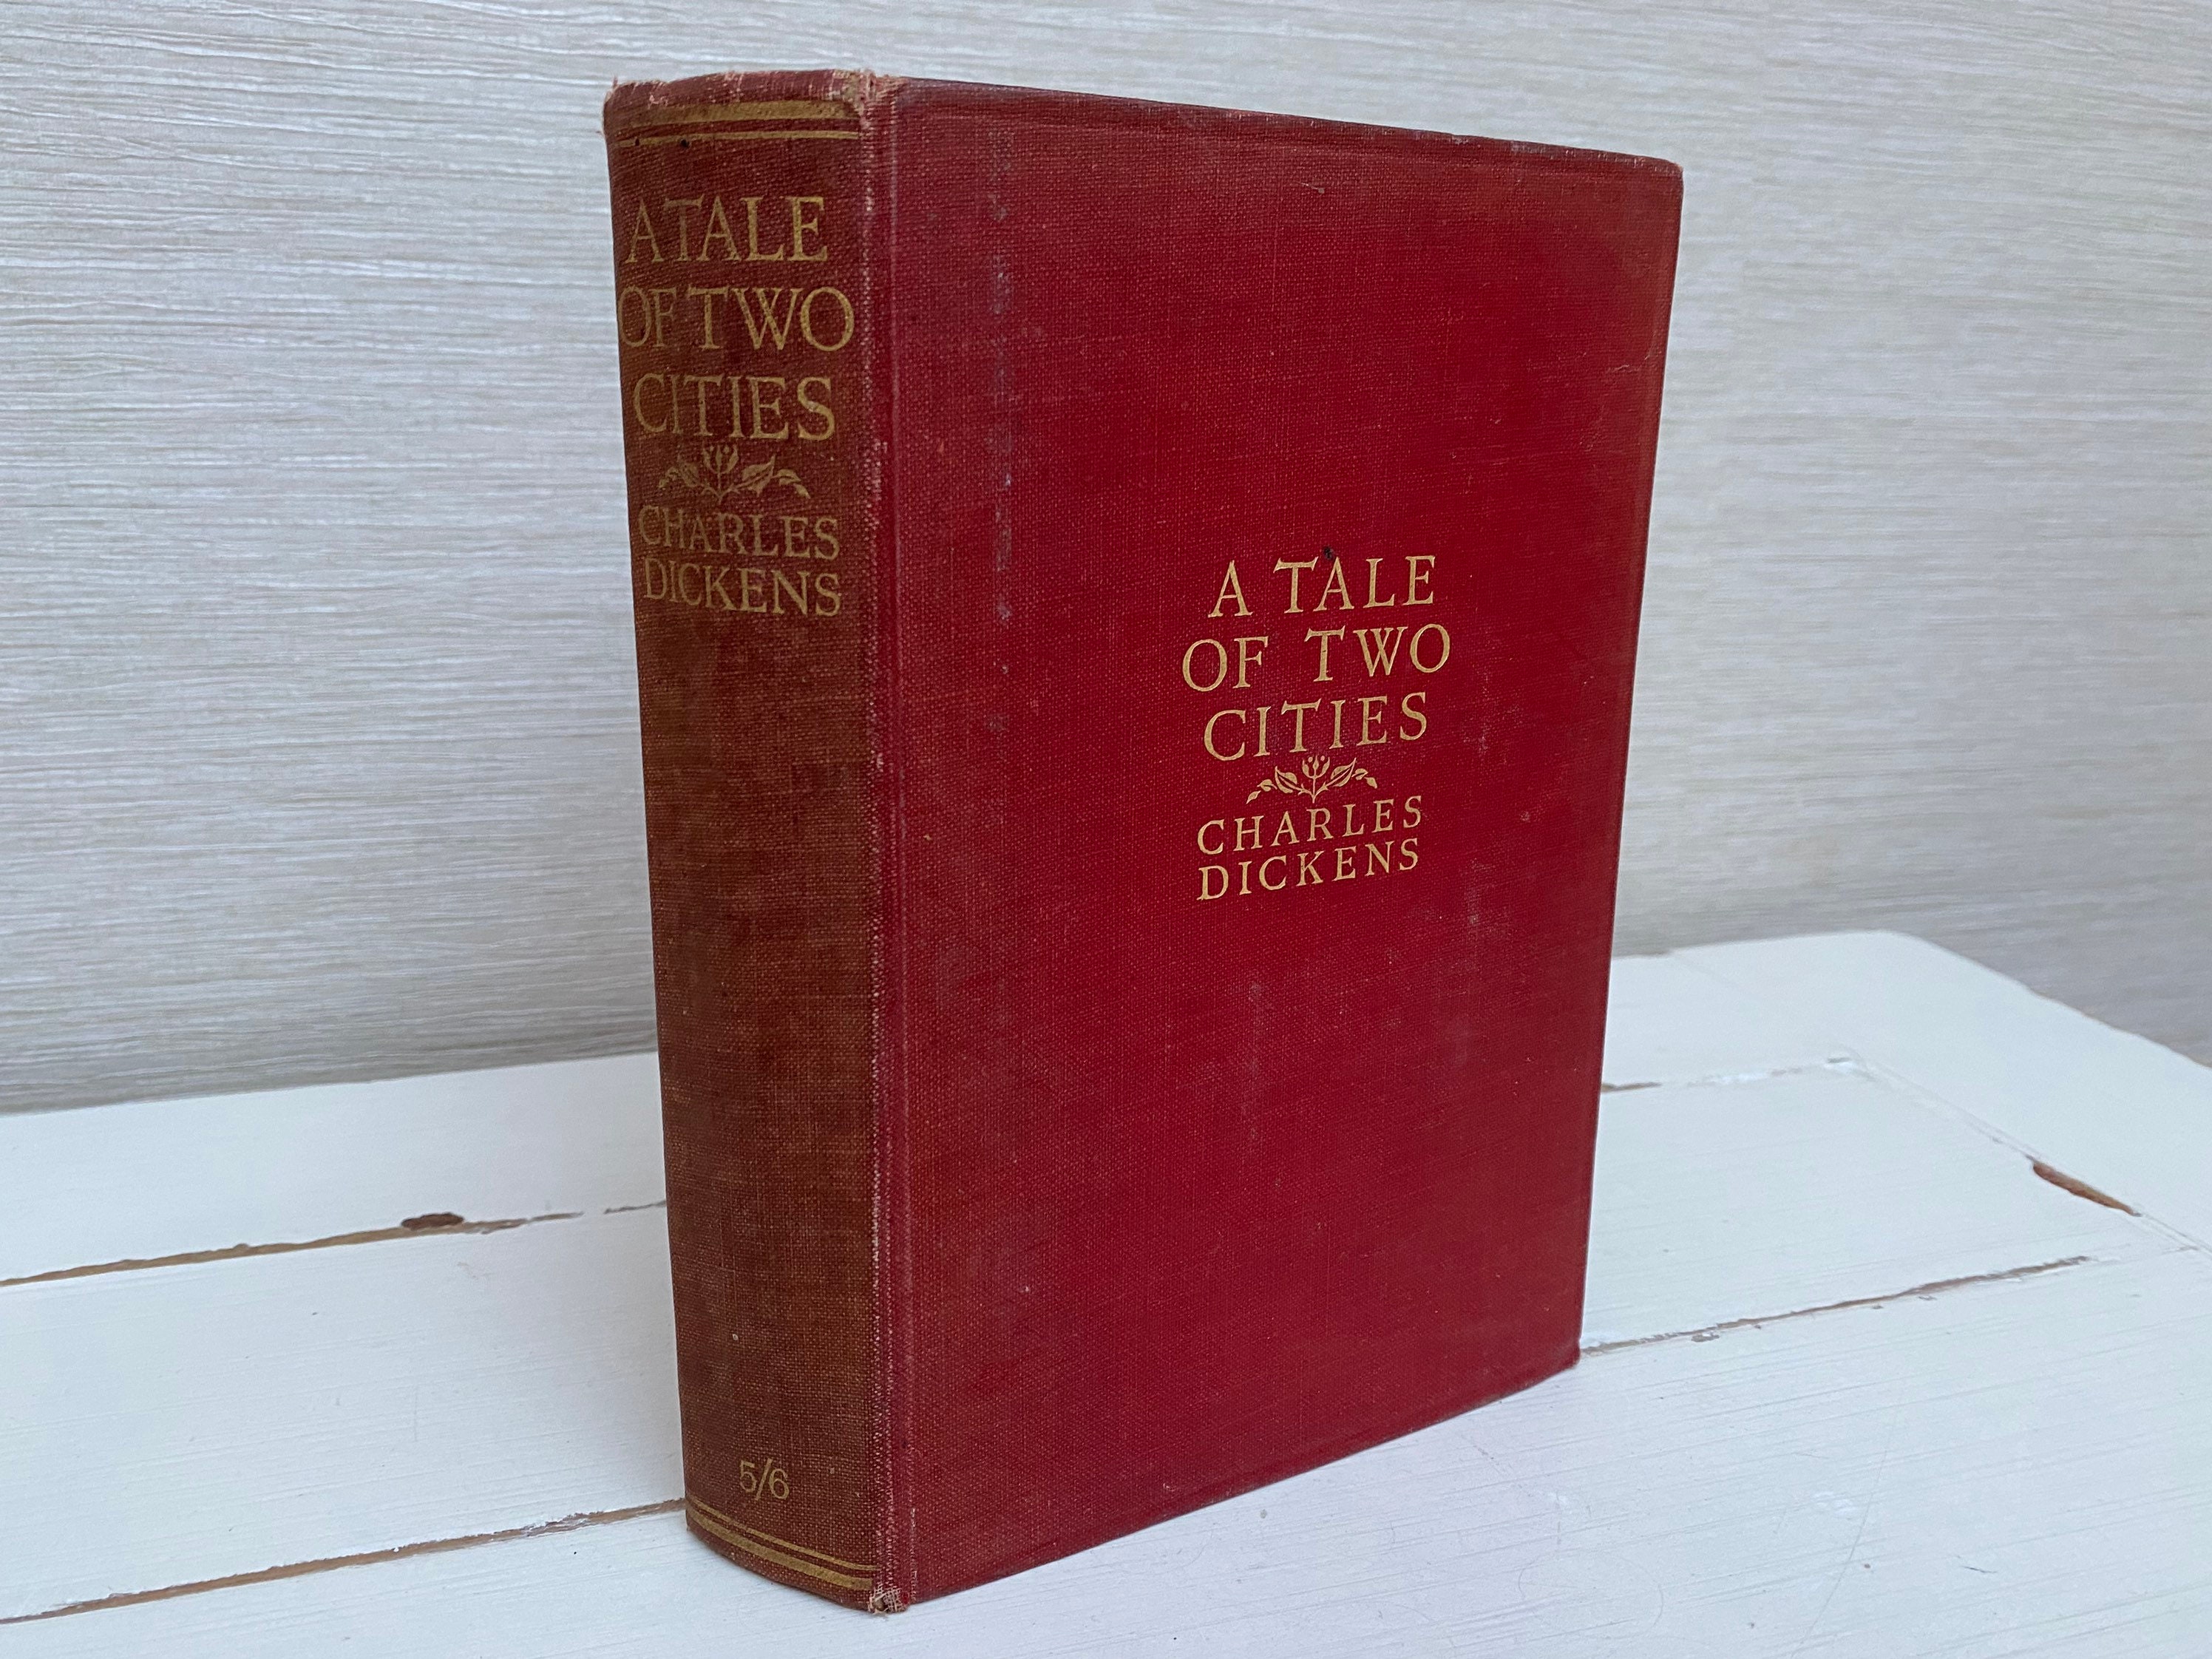 Oliver Twist (Collector's Edition) - Wordsworth Editions